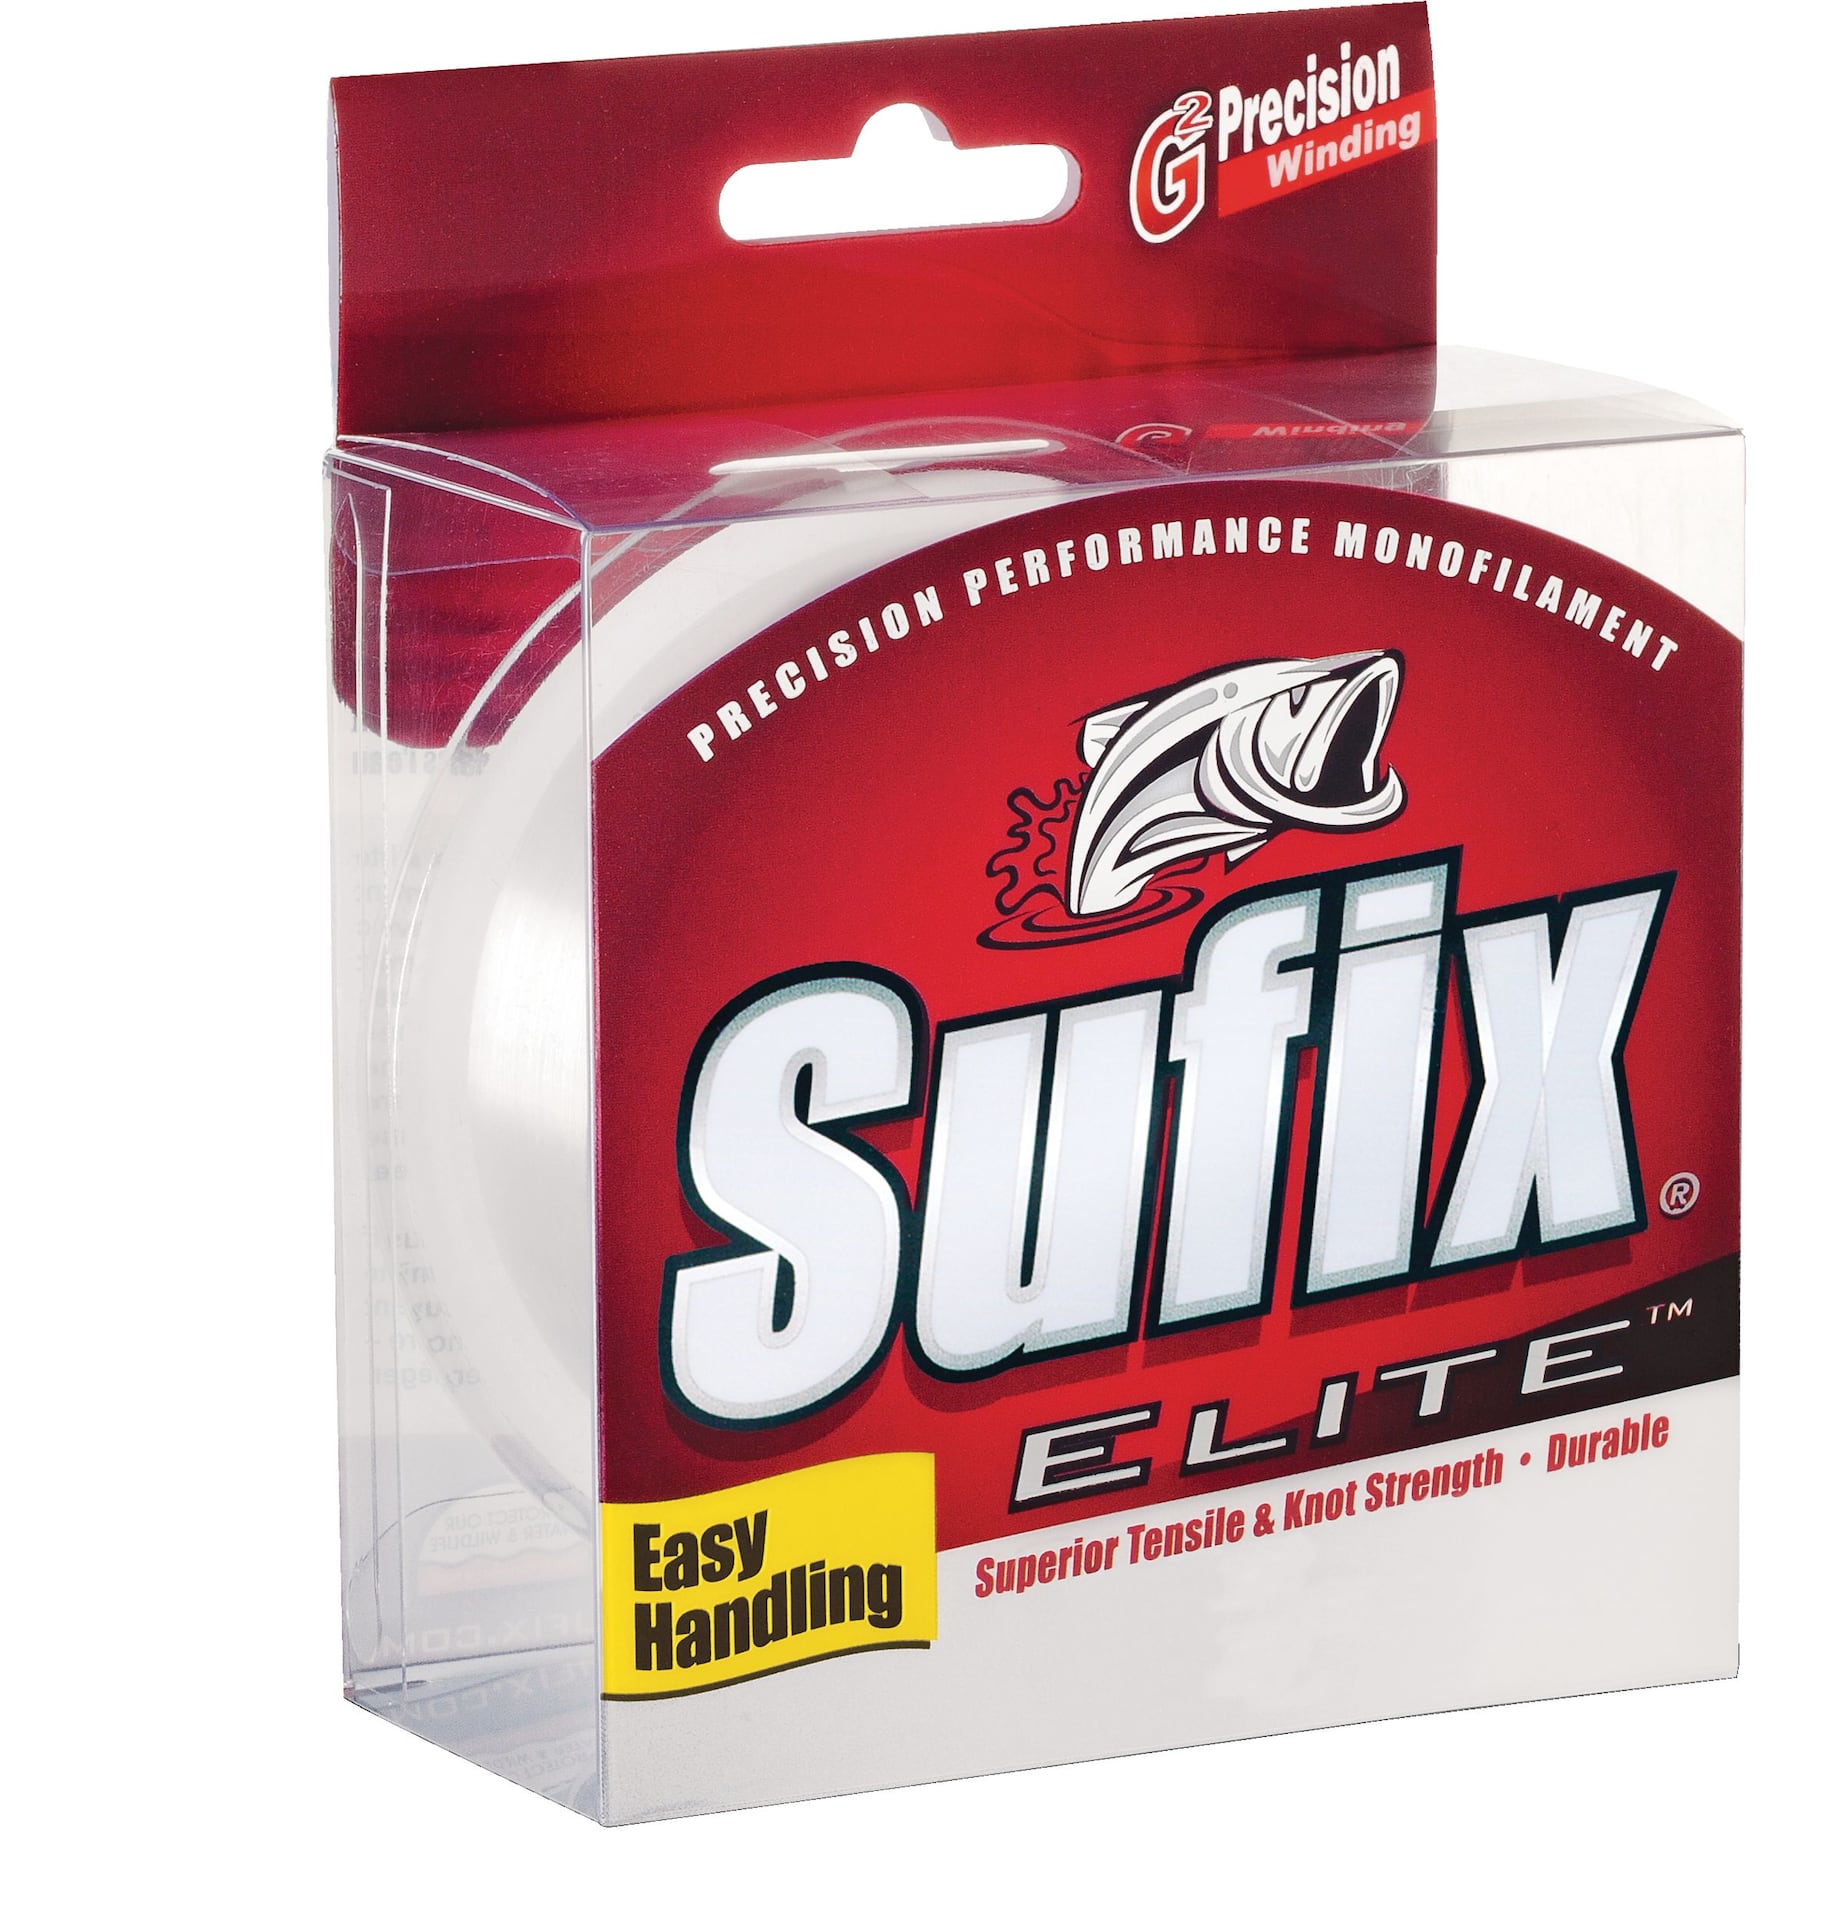 SUFIX PROMIX MONOFILAMENT Fishing Line 17lb Test 330yds Clear - FAST  SHIPPING! $9.99 - PicClick